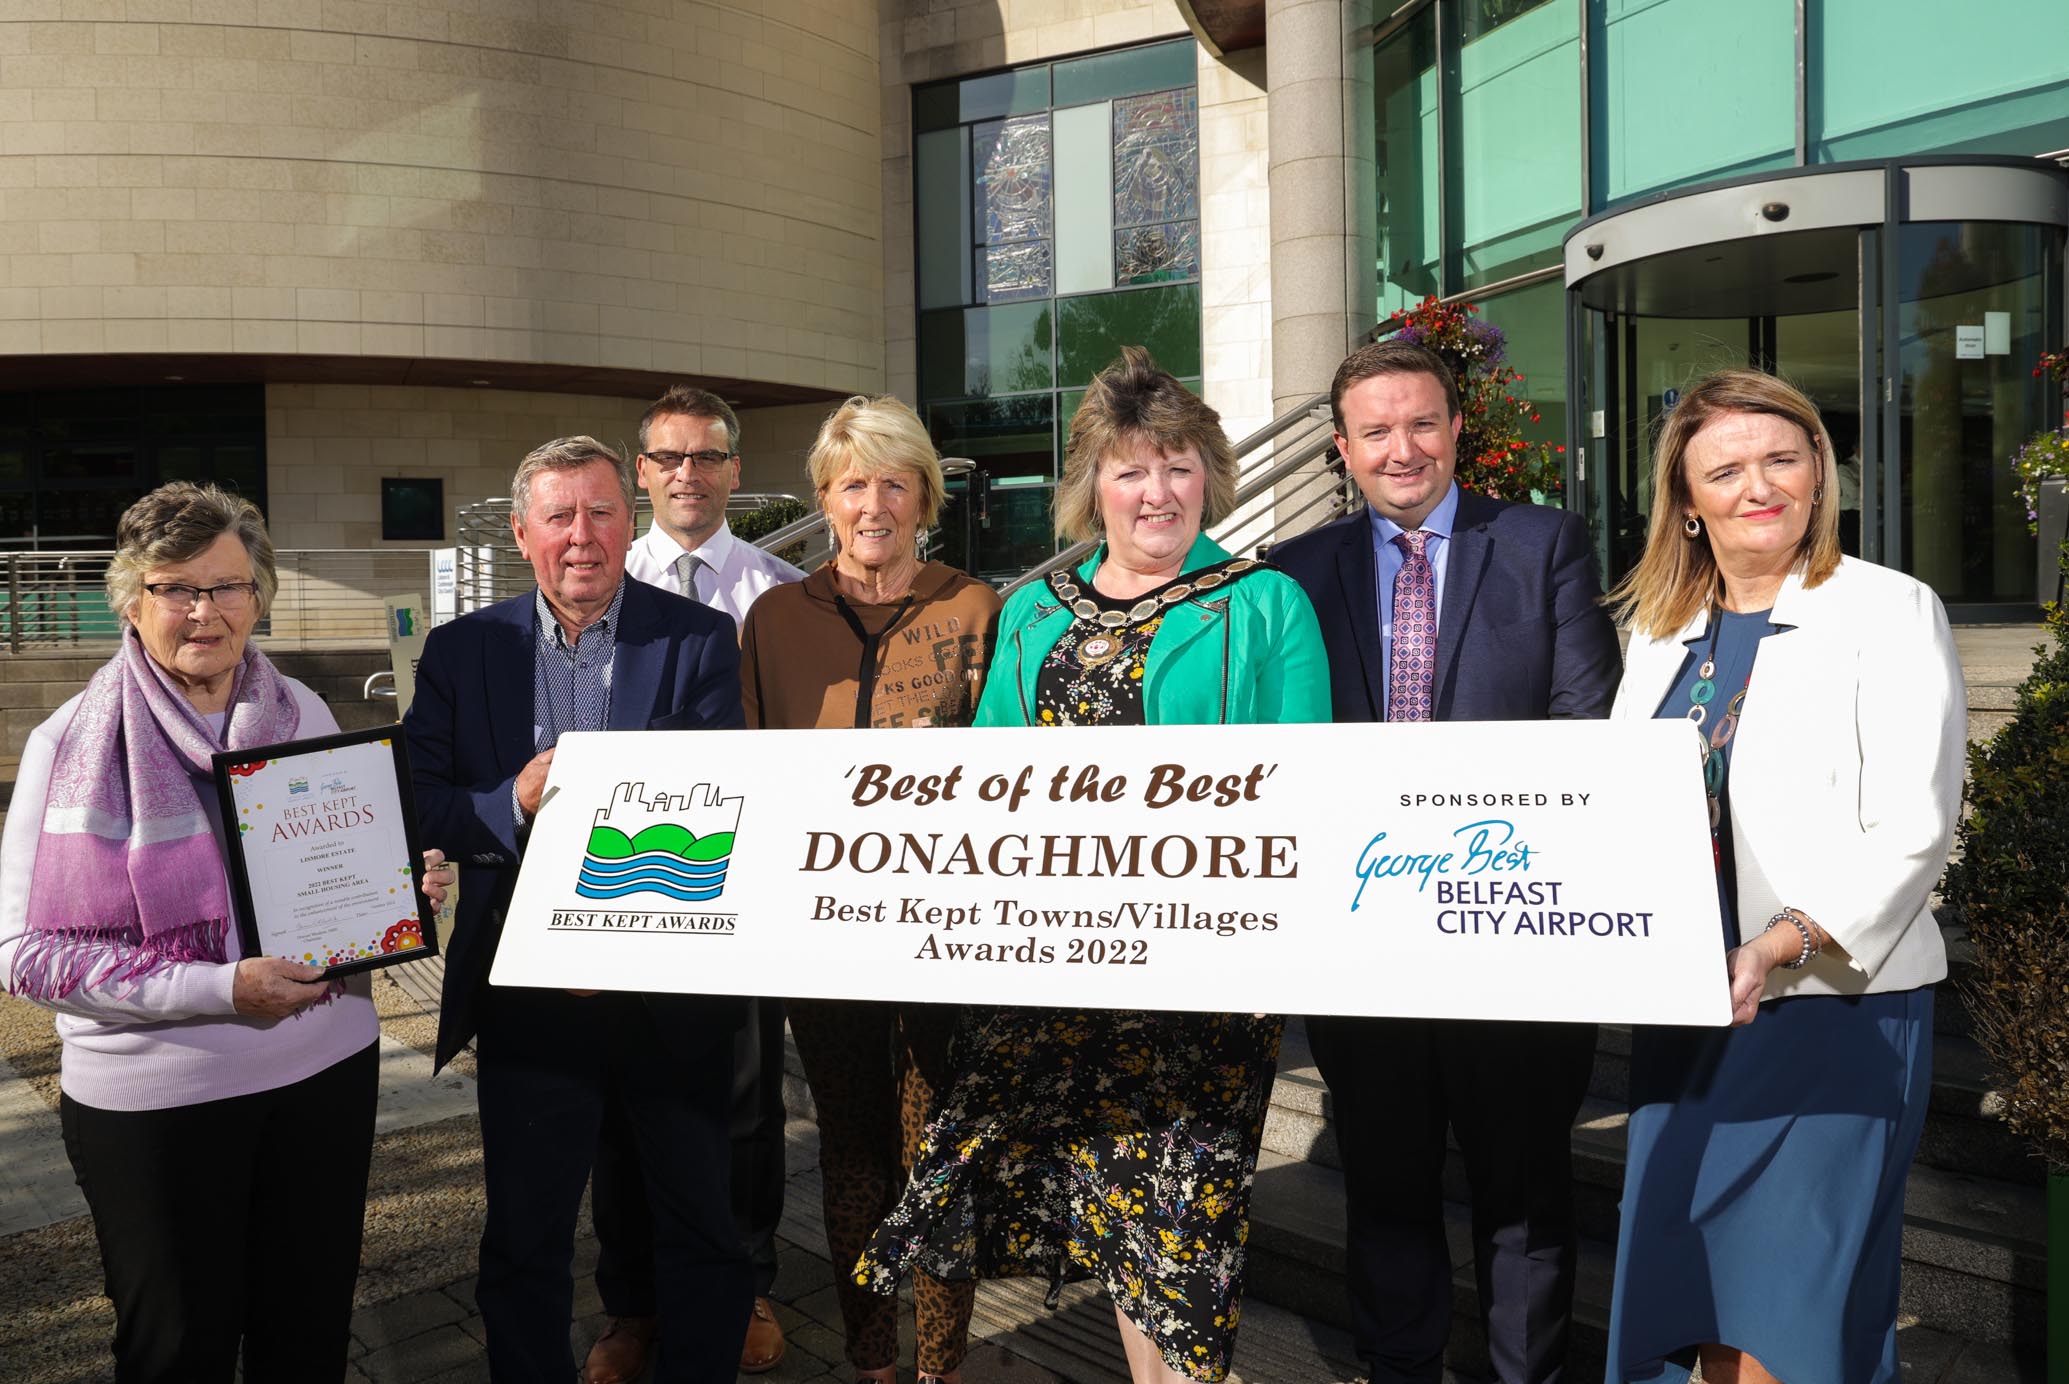 2022 Best Kept Winners revealed as Donaghmore lifts ‘Best of the Best’ Award